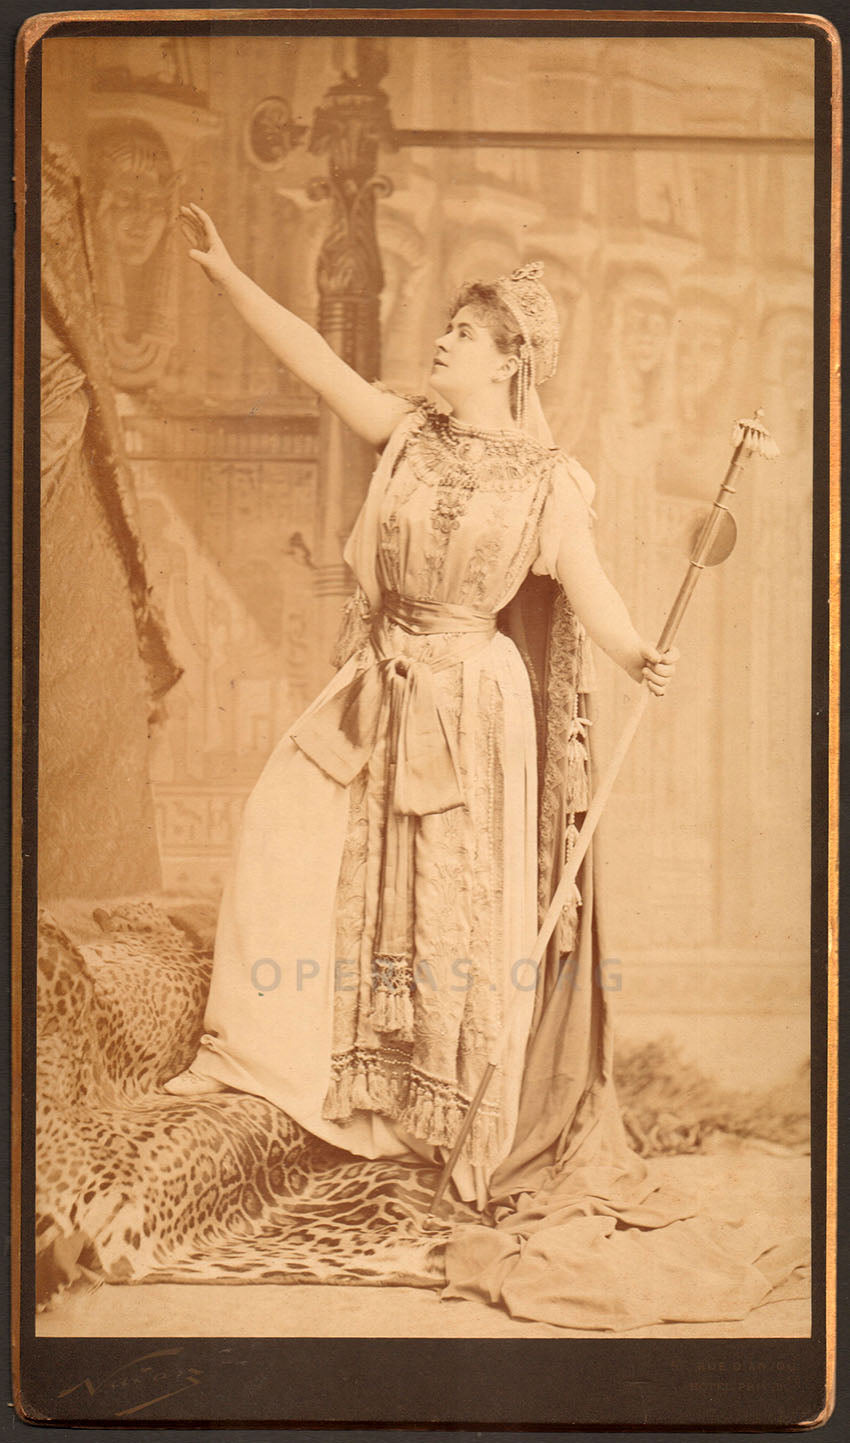 Marie Delna as Didon in Les Troyens - Debut at age 17